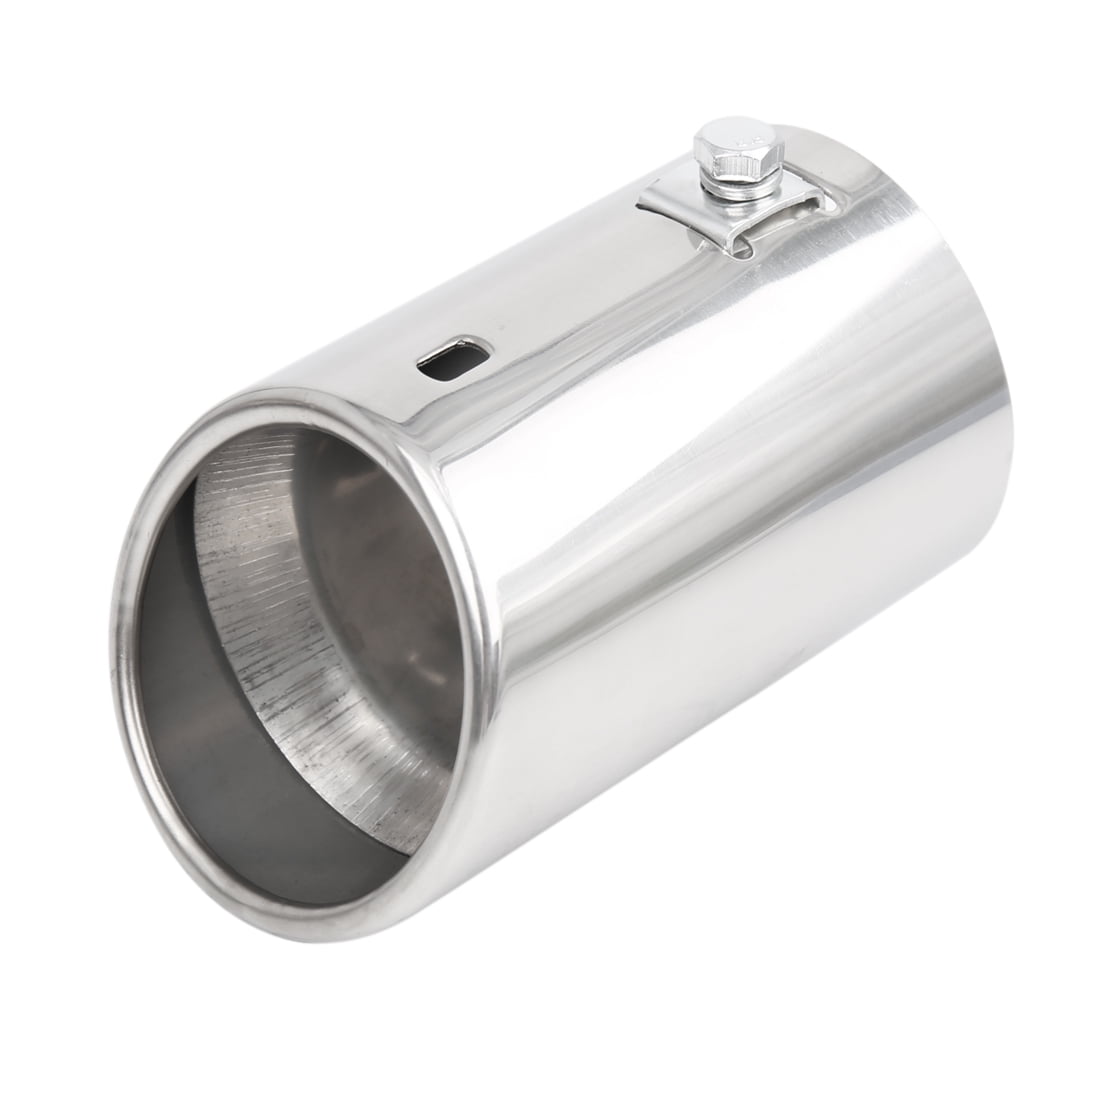 X AUTOHAUX 5.20 Inch Stainless Steel Car Exhaust Muffler Tail Pipe Tip 2.36 Inch Inlet 3.46 Inch Outlet